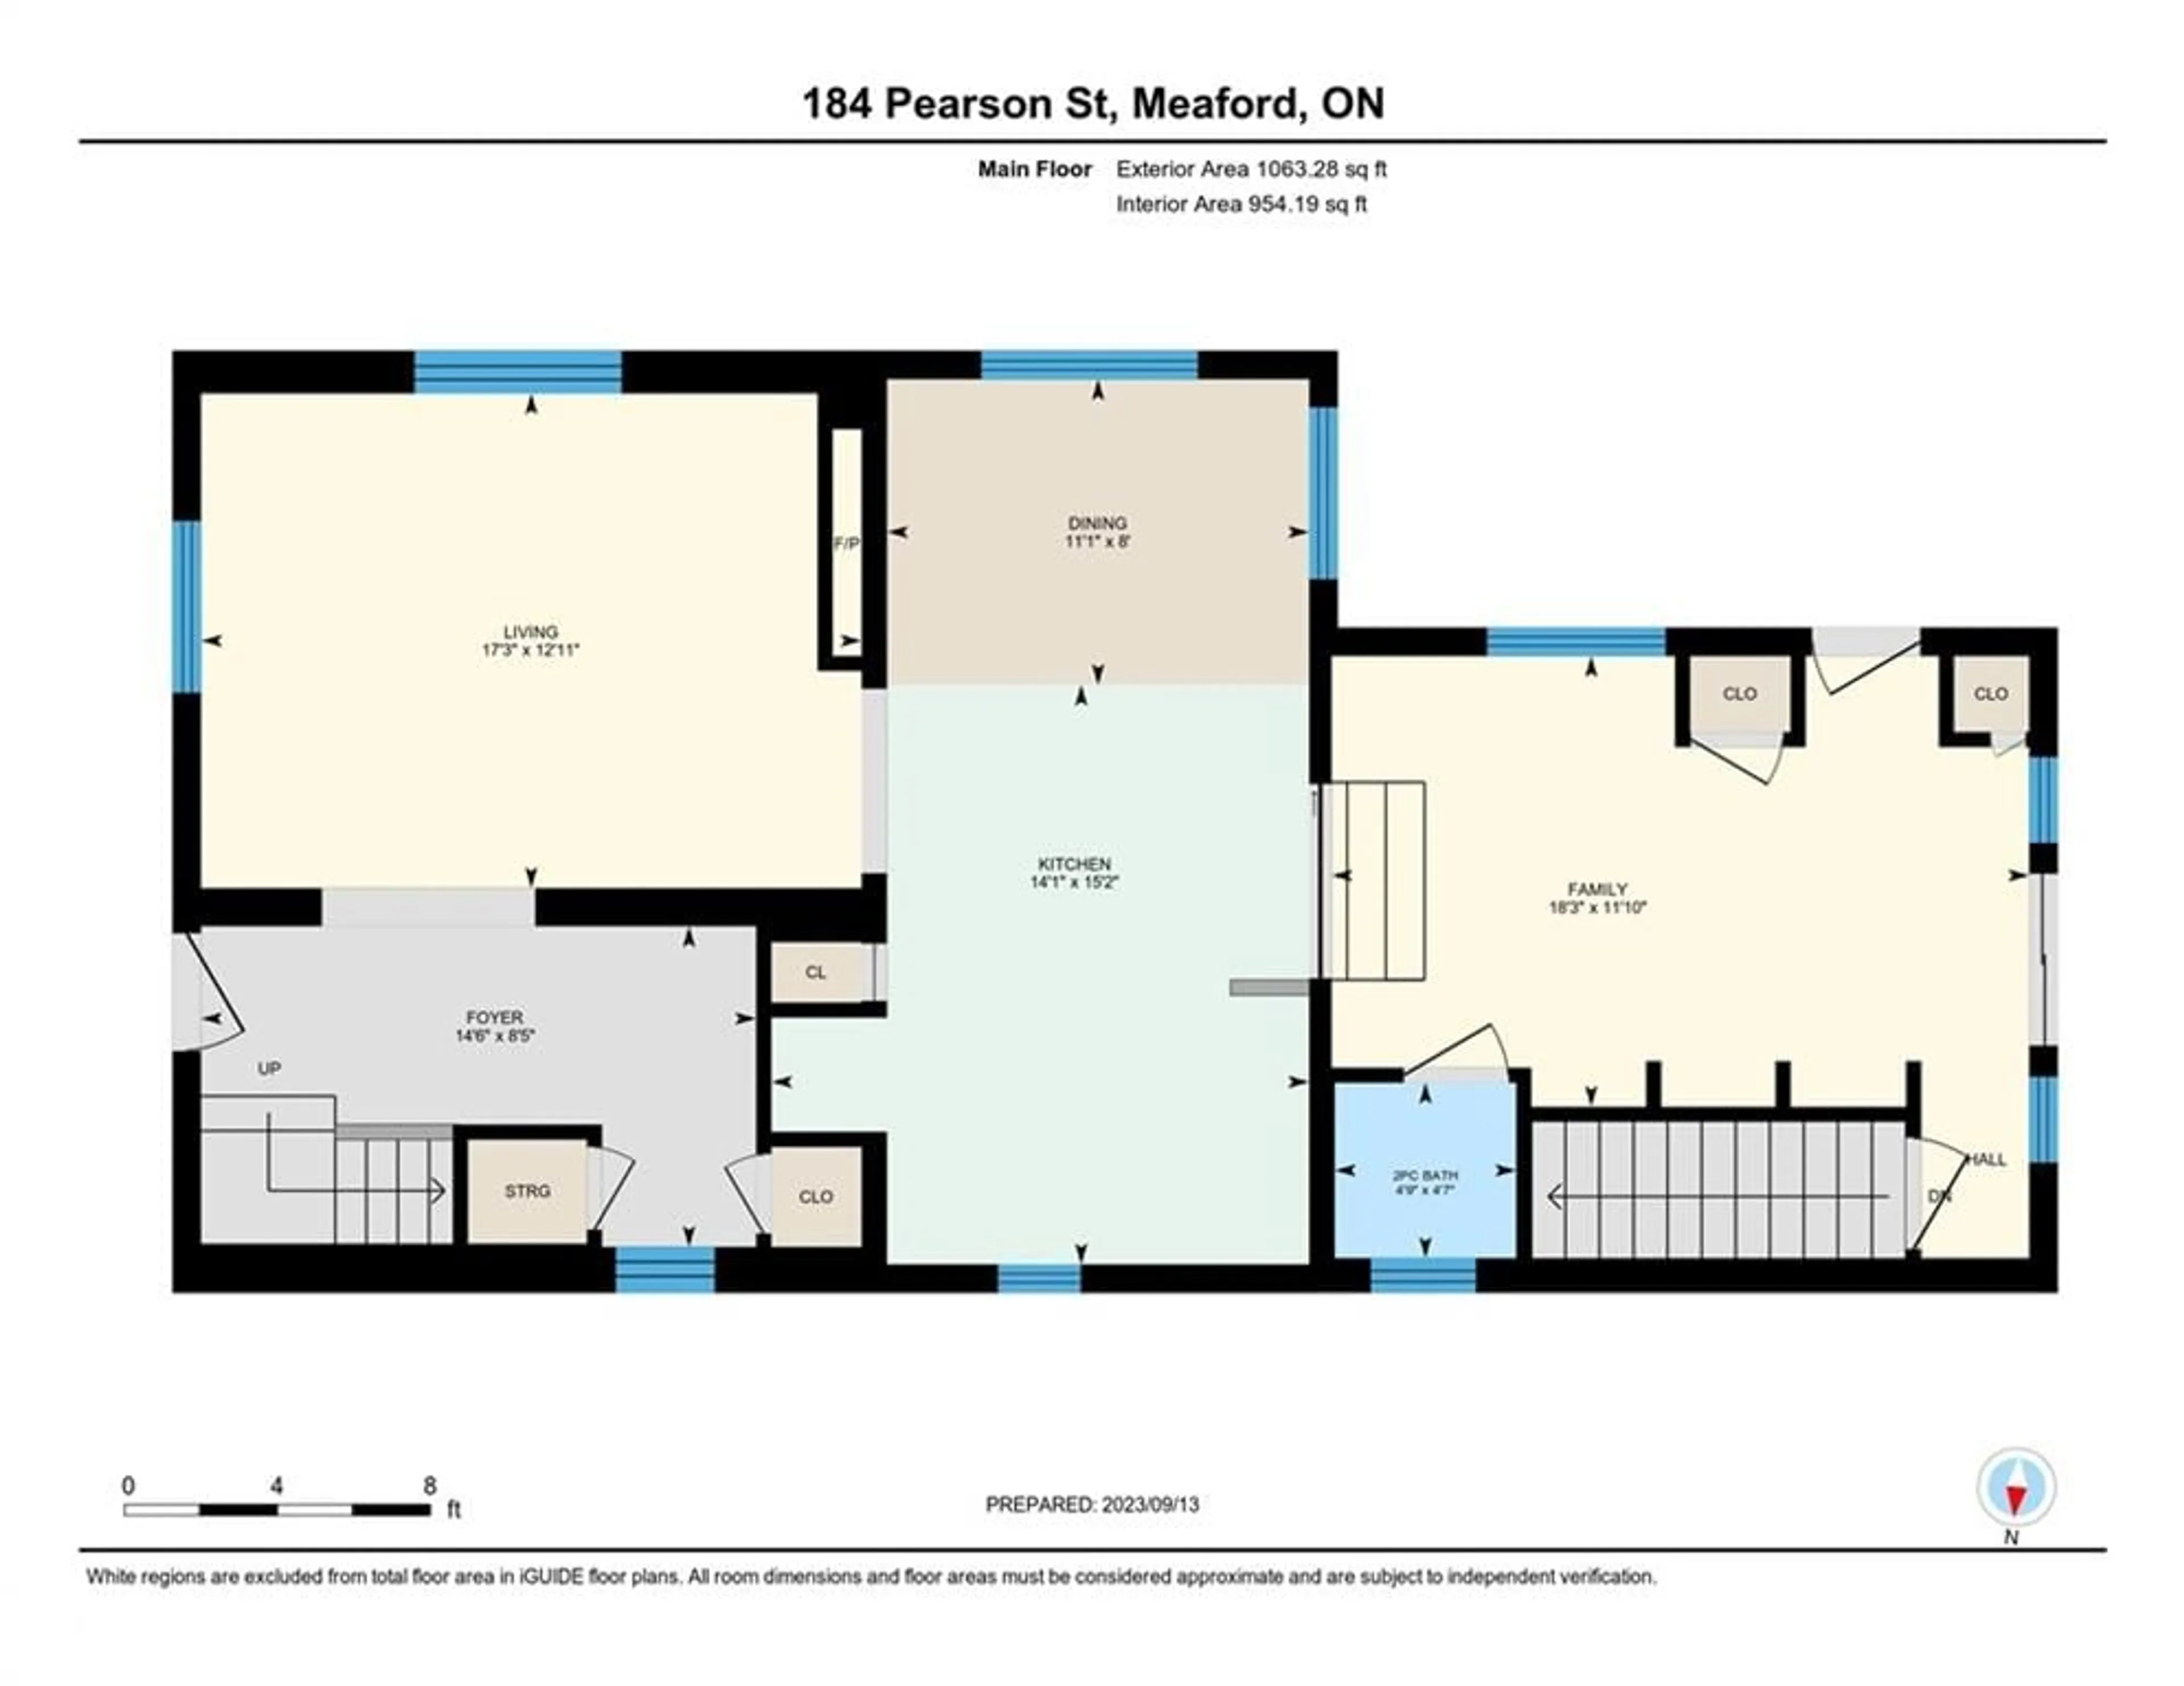 Floor plan for 184 Pearson St, Meaford Ontario N4L 1K6